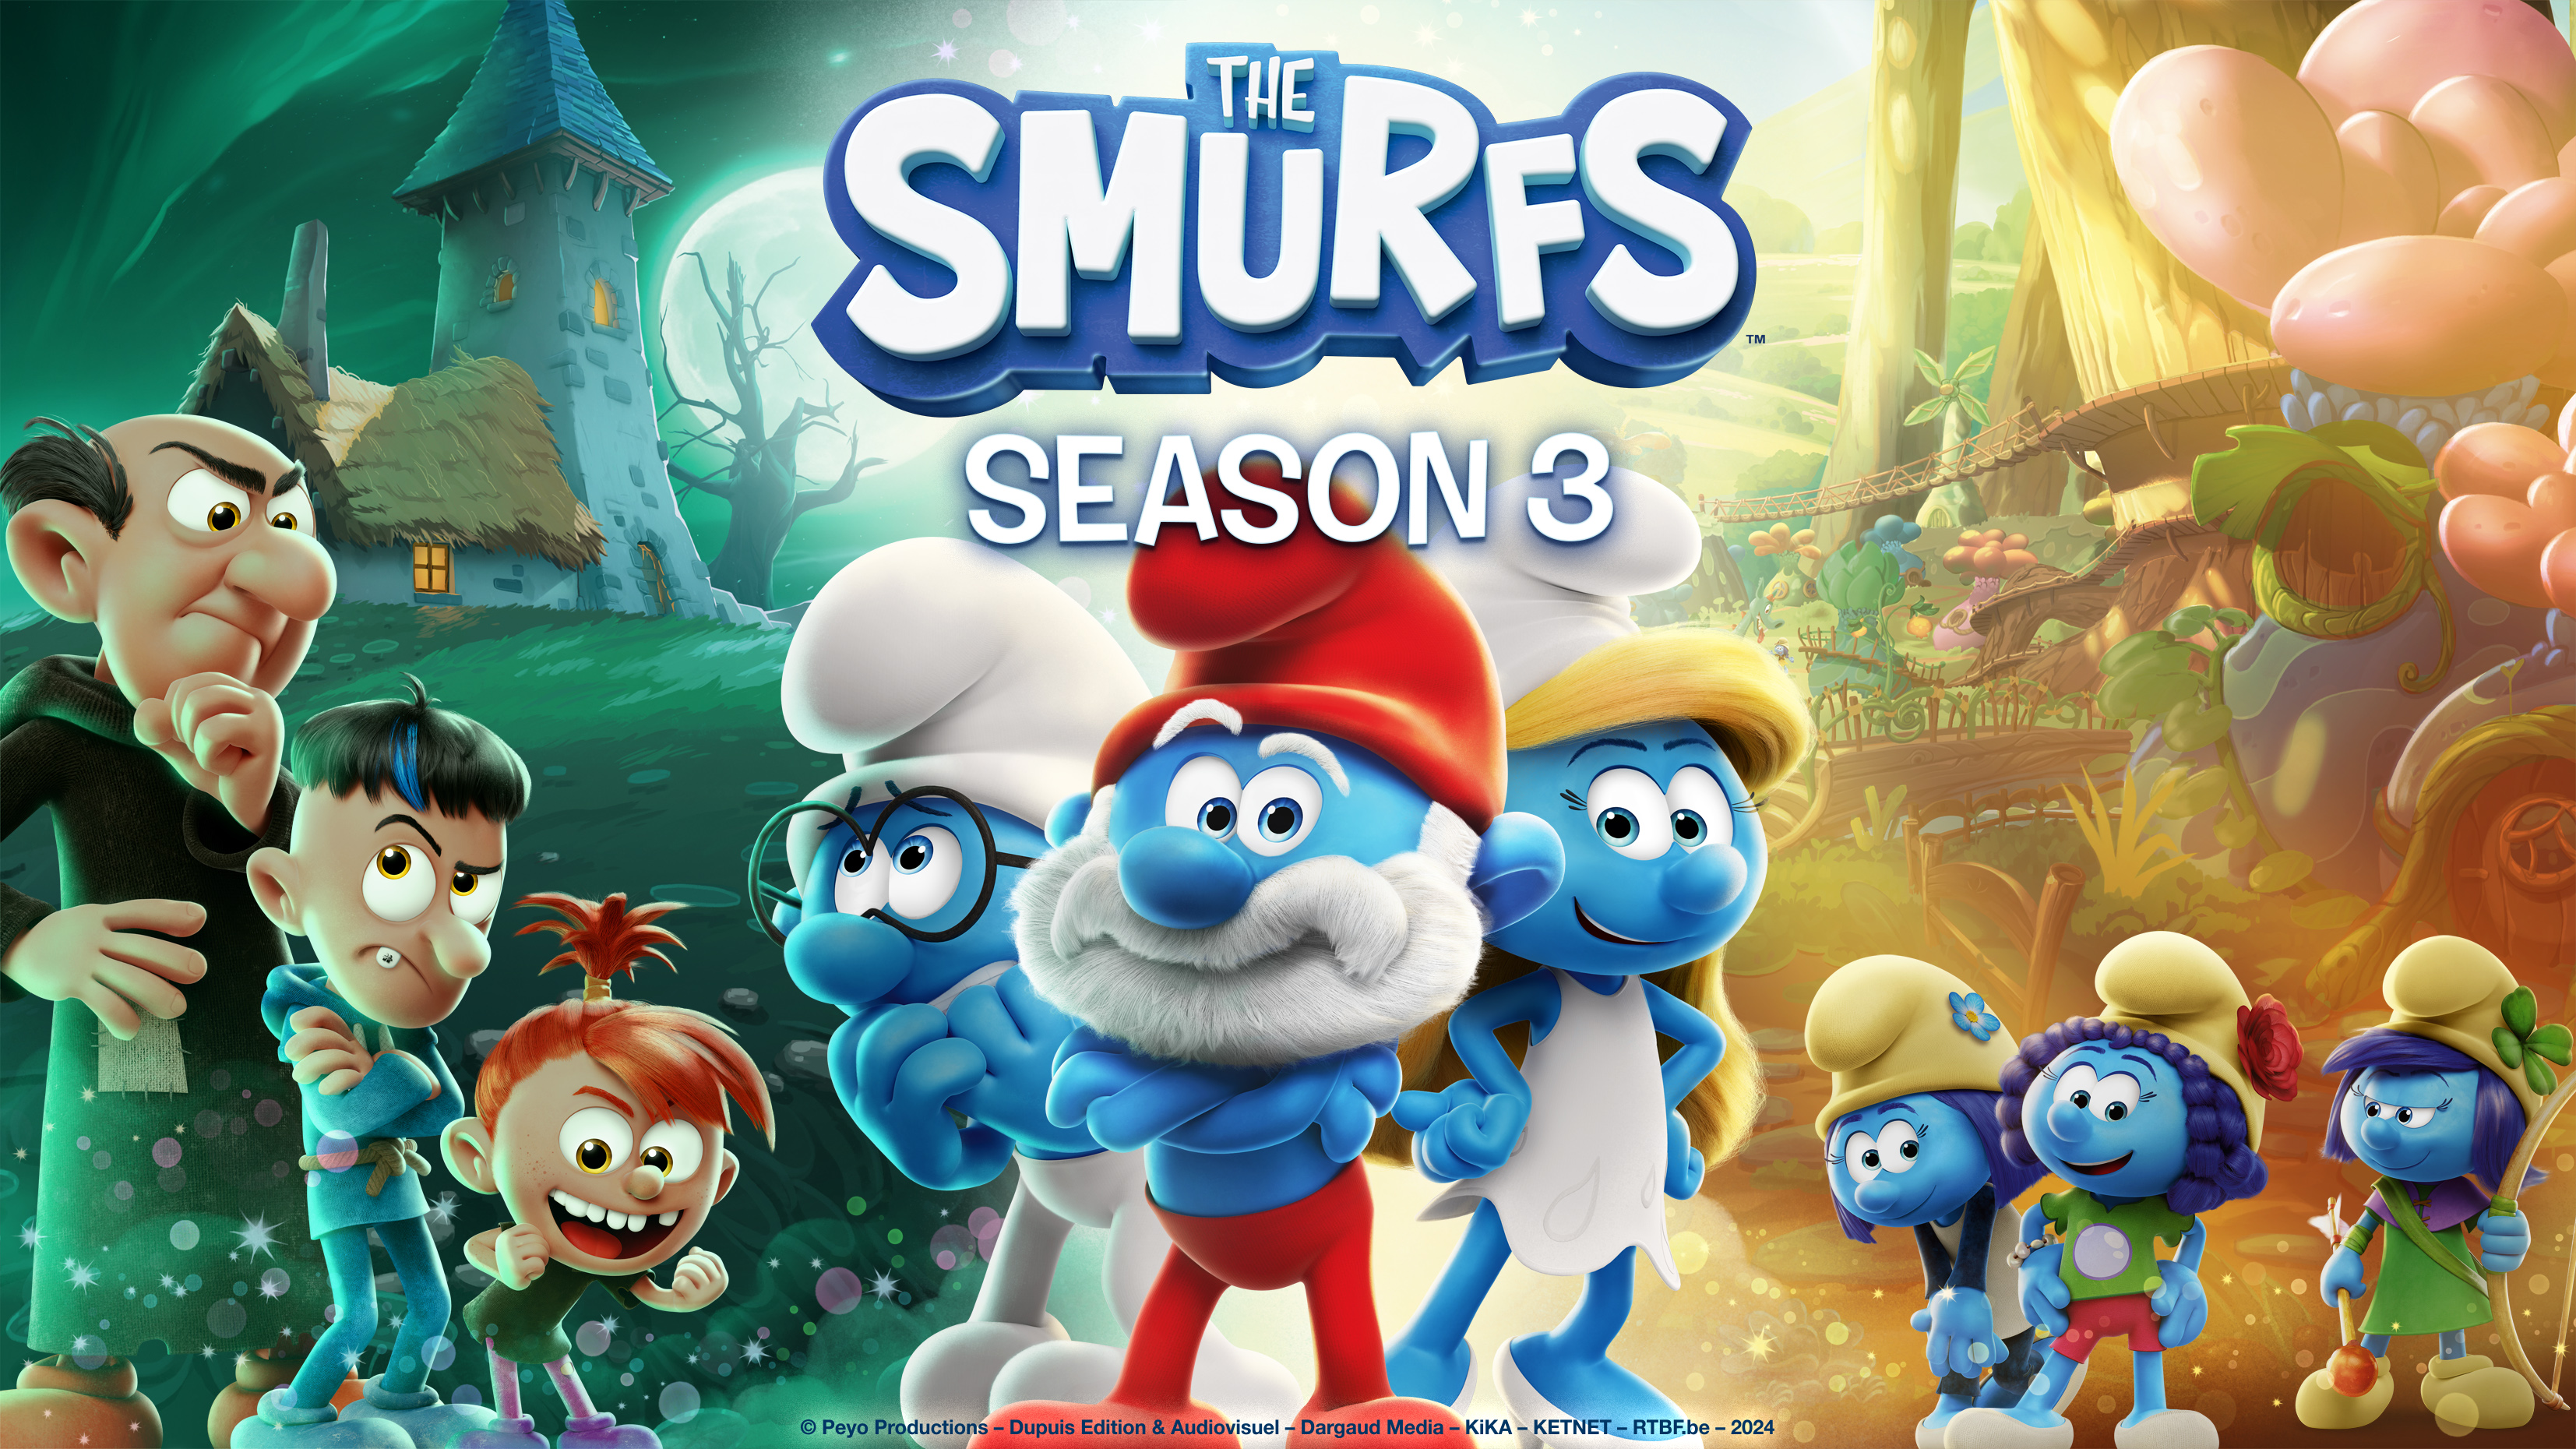 Re: The Smurf Report button - Answer HQ